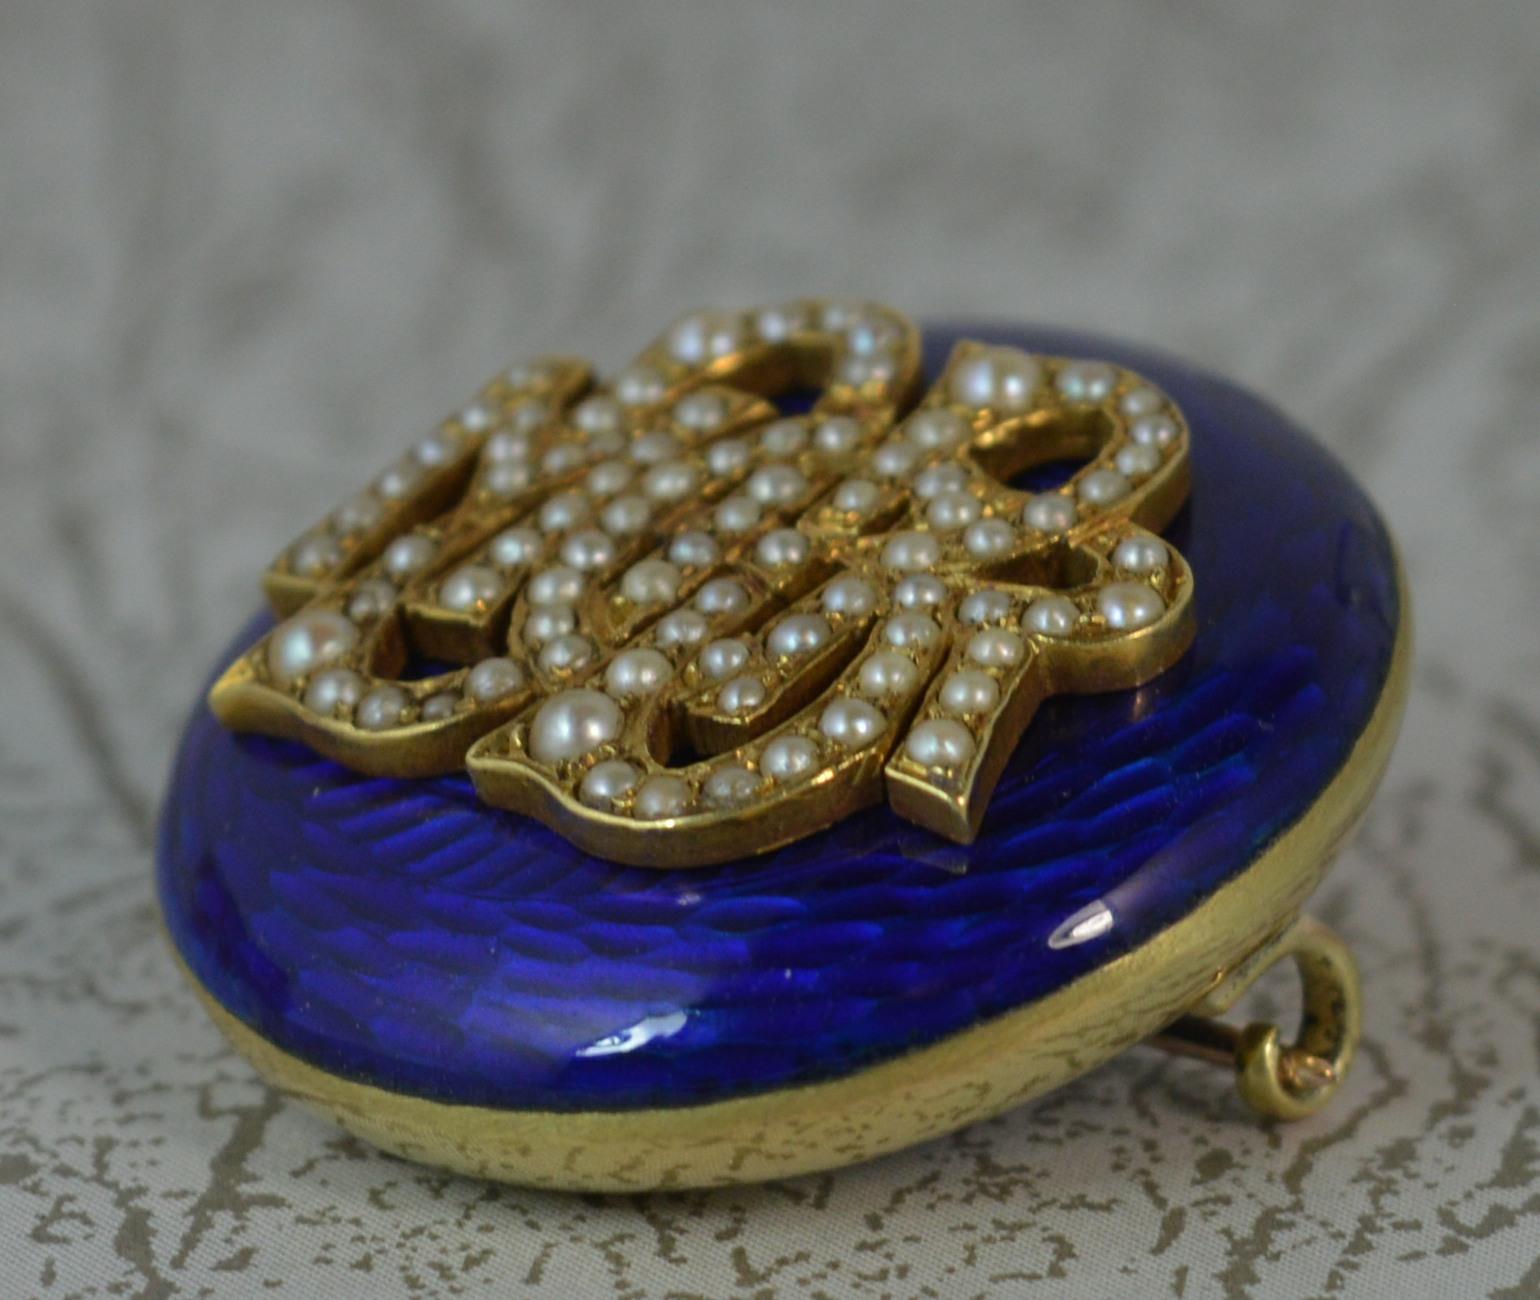 A mid to late Victorian period circular brooch. 15 carat gold example. Mourning design with locket section to reverse. Designed with DB MOR encrusted with seed pearls throughout and with a deep Royal blue enamel throughout the front.

Condition ;